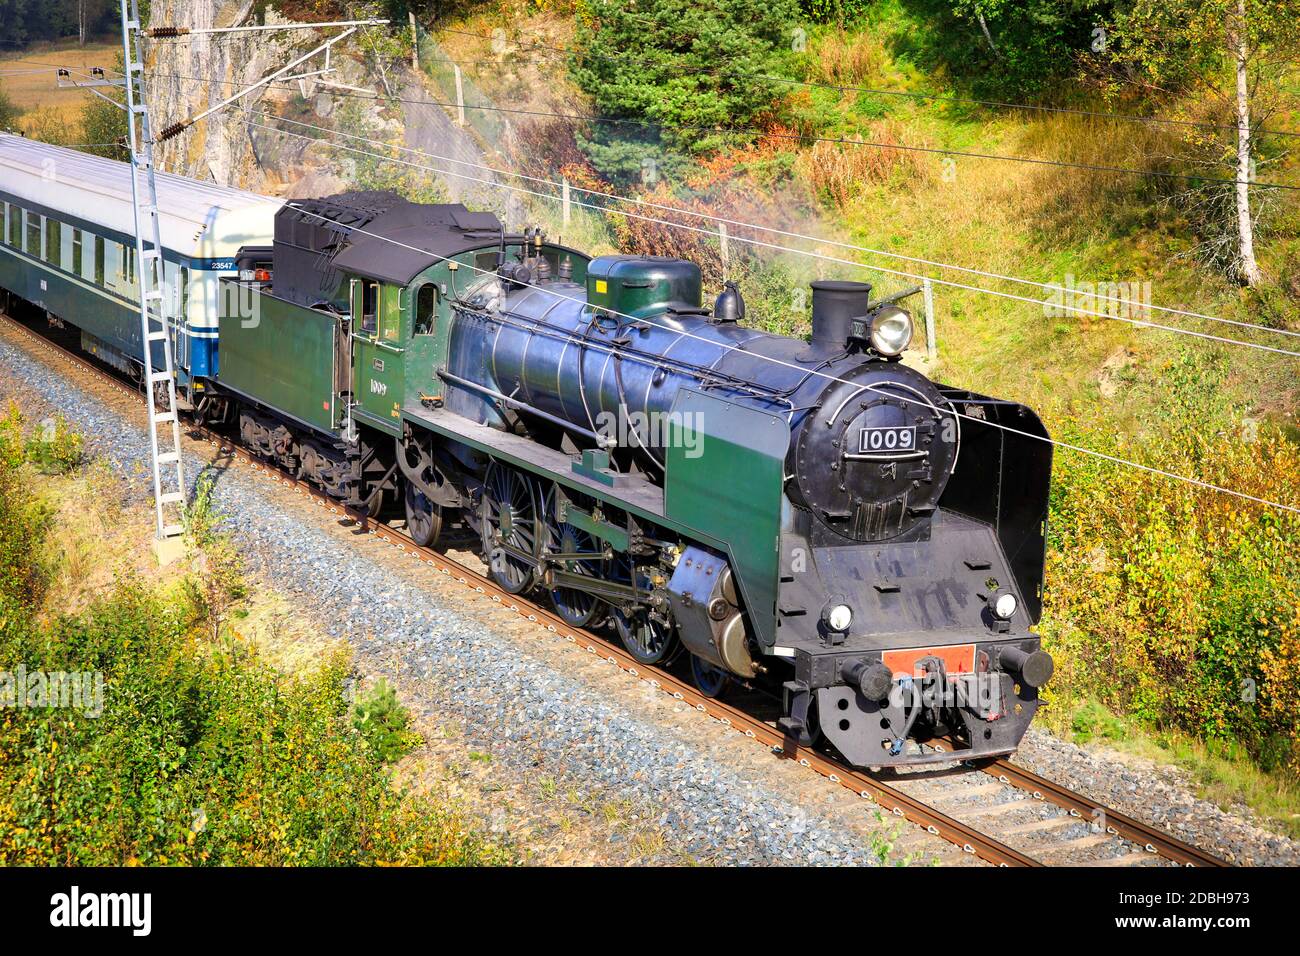 Hr1 class steam locomotive Ukko-Pekka 1009 at speed shortly after departing Salo, Finland September 18, 2020. Elevated view. Stock Photo